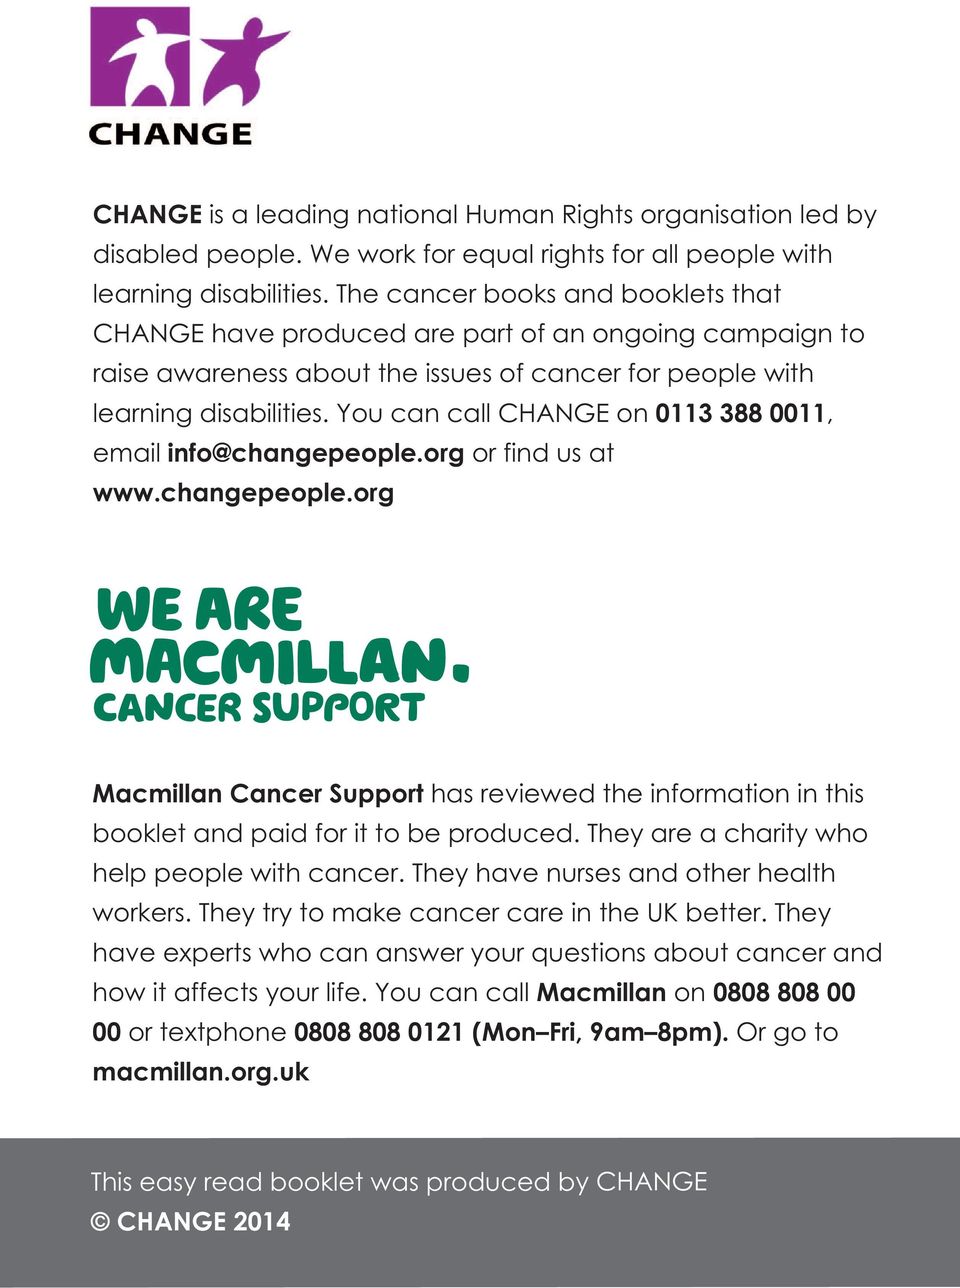 You can call CHANGE on 0113 388 0011, email info@changepeople.org or find us at www.changepeople.org Macmillan Cancer Support has reviewed the information in this booklet and paid for it to be produced.